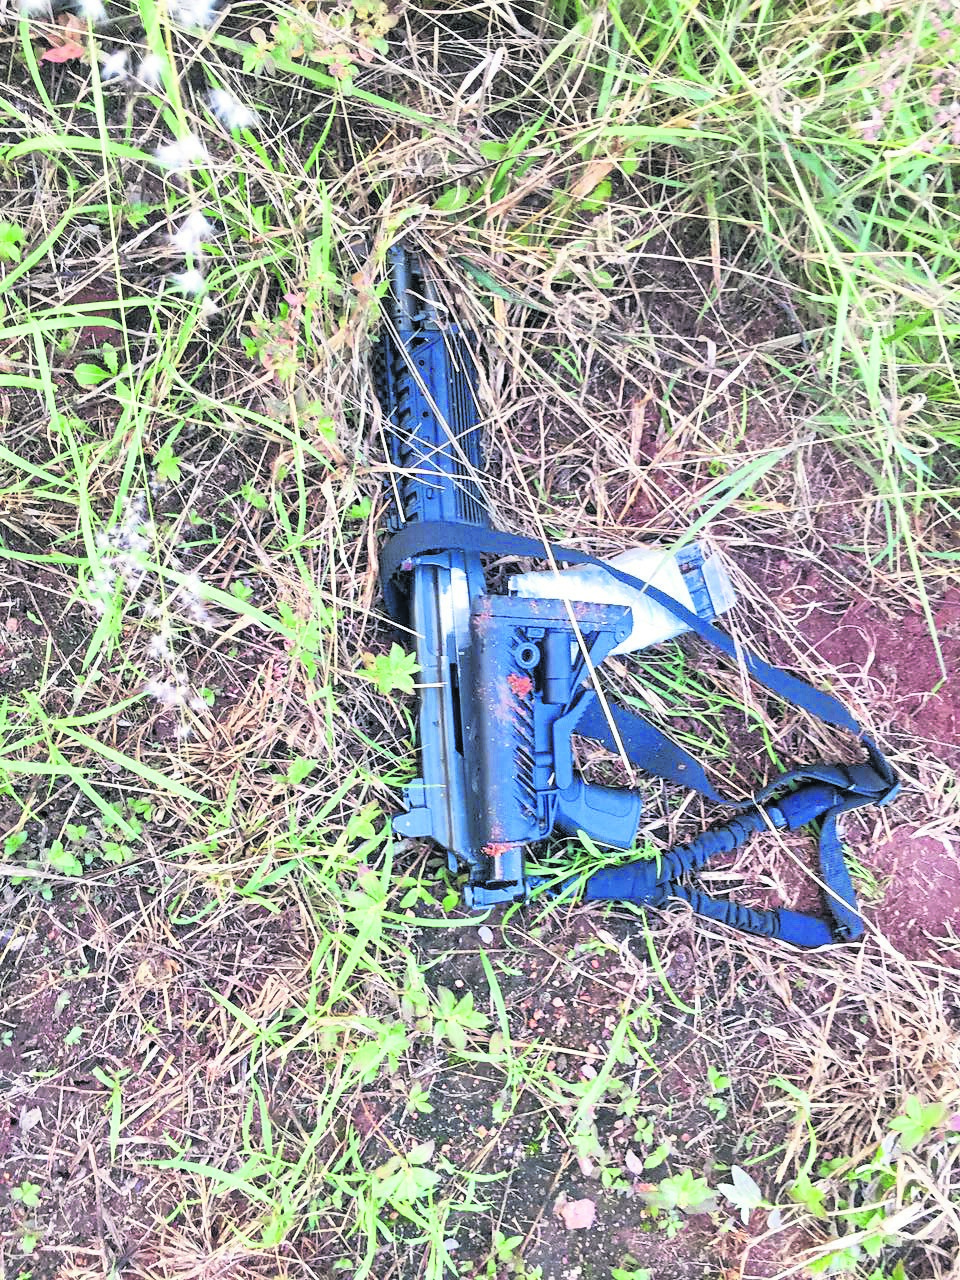 A rifle that was found at the scene of the robbery in Mbombela yesterday.